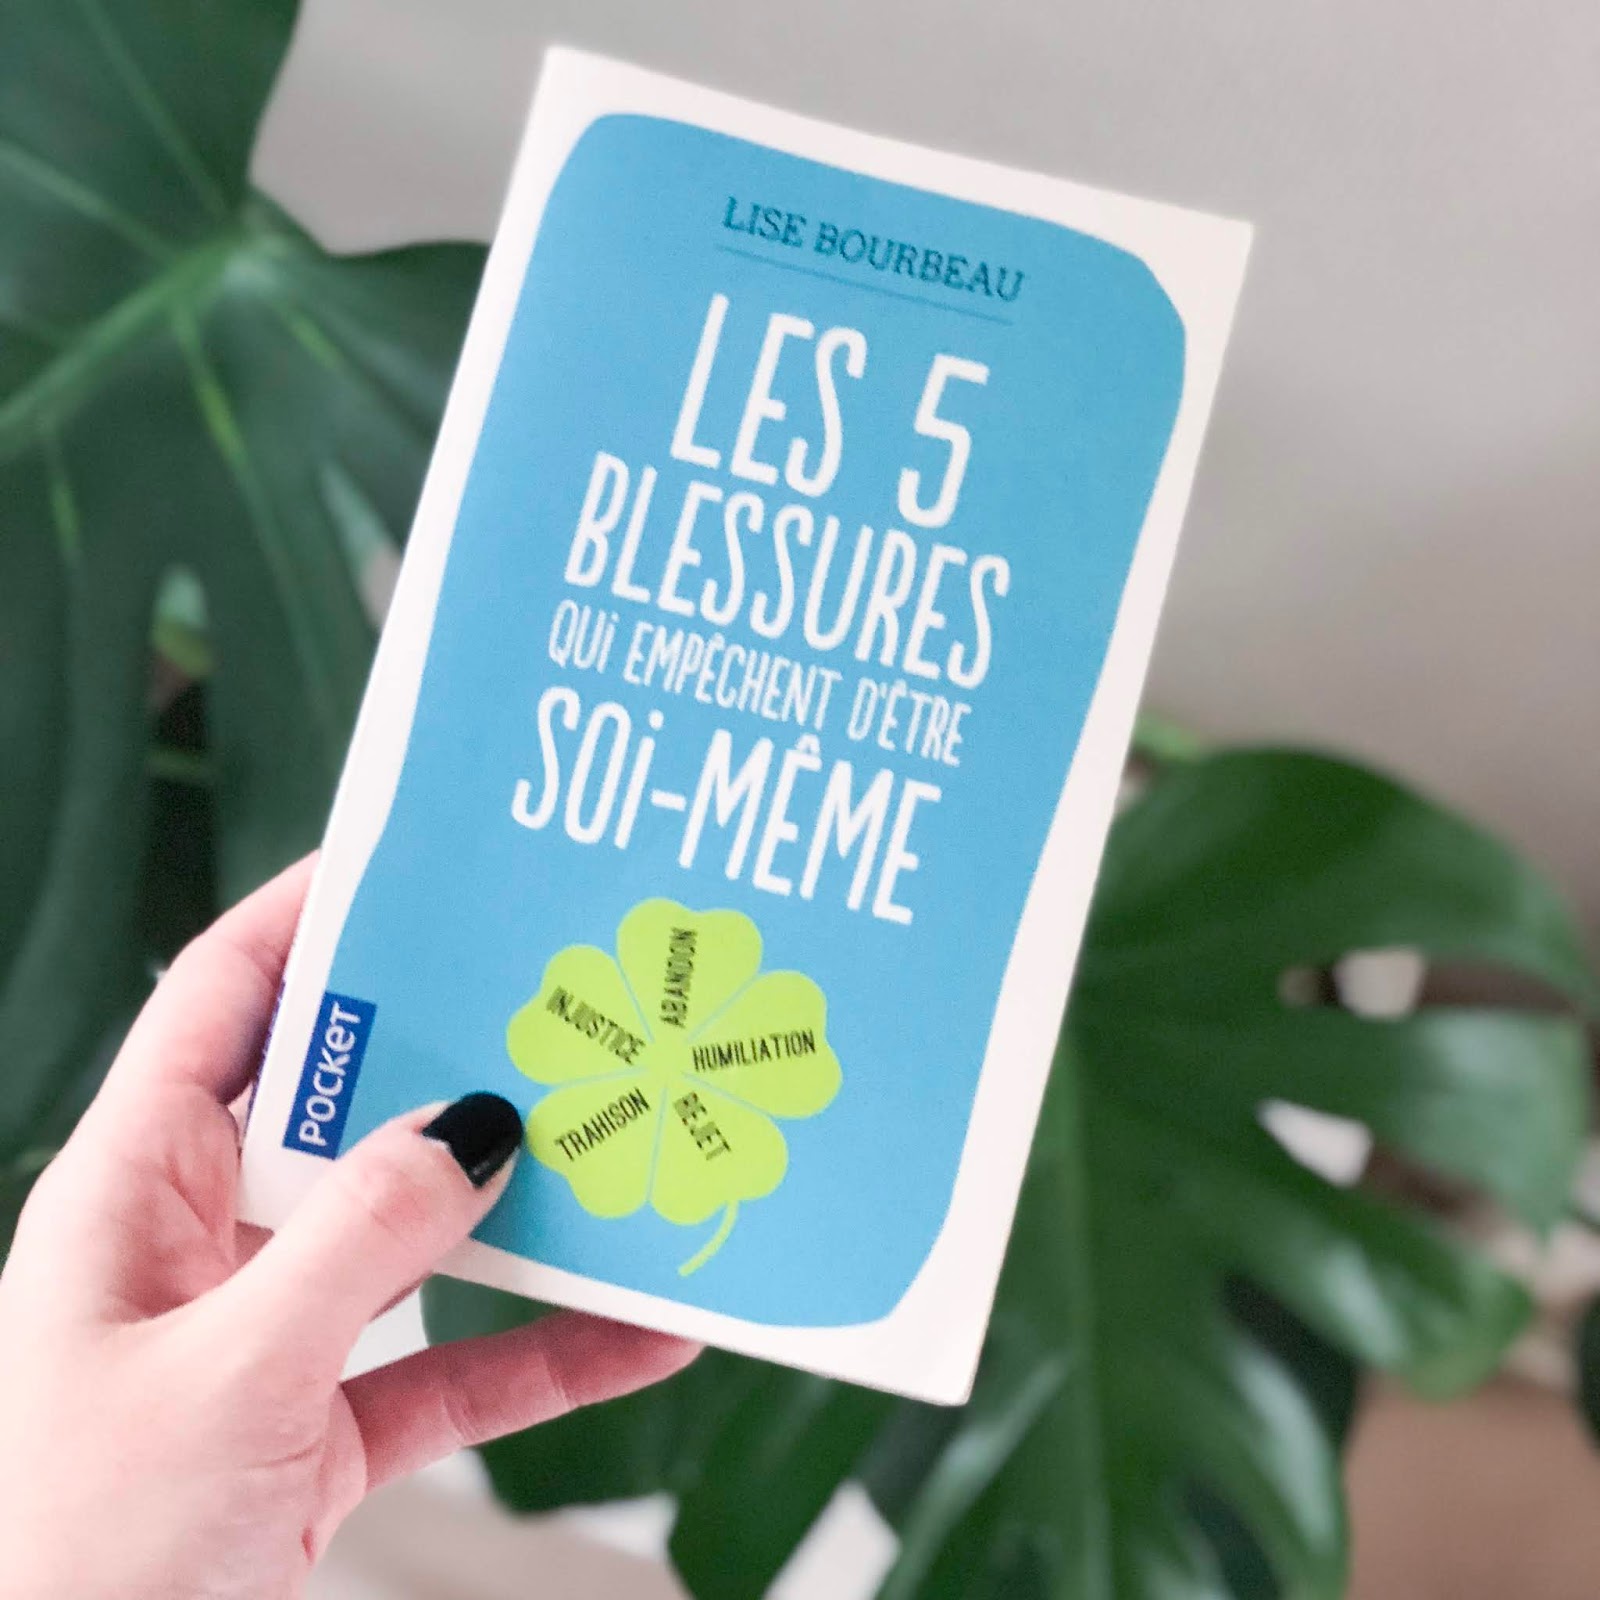 The New Blacck - Blog - Les 5 blessures - lecture